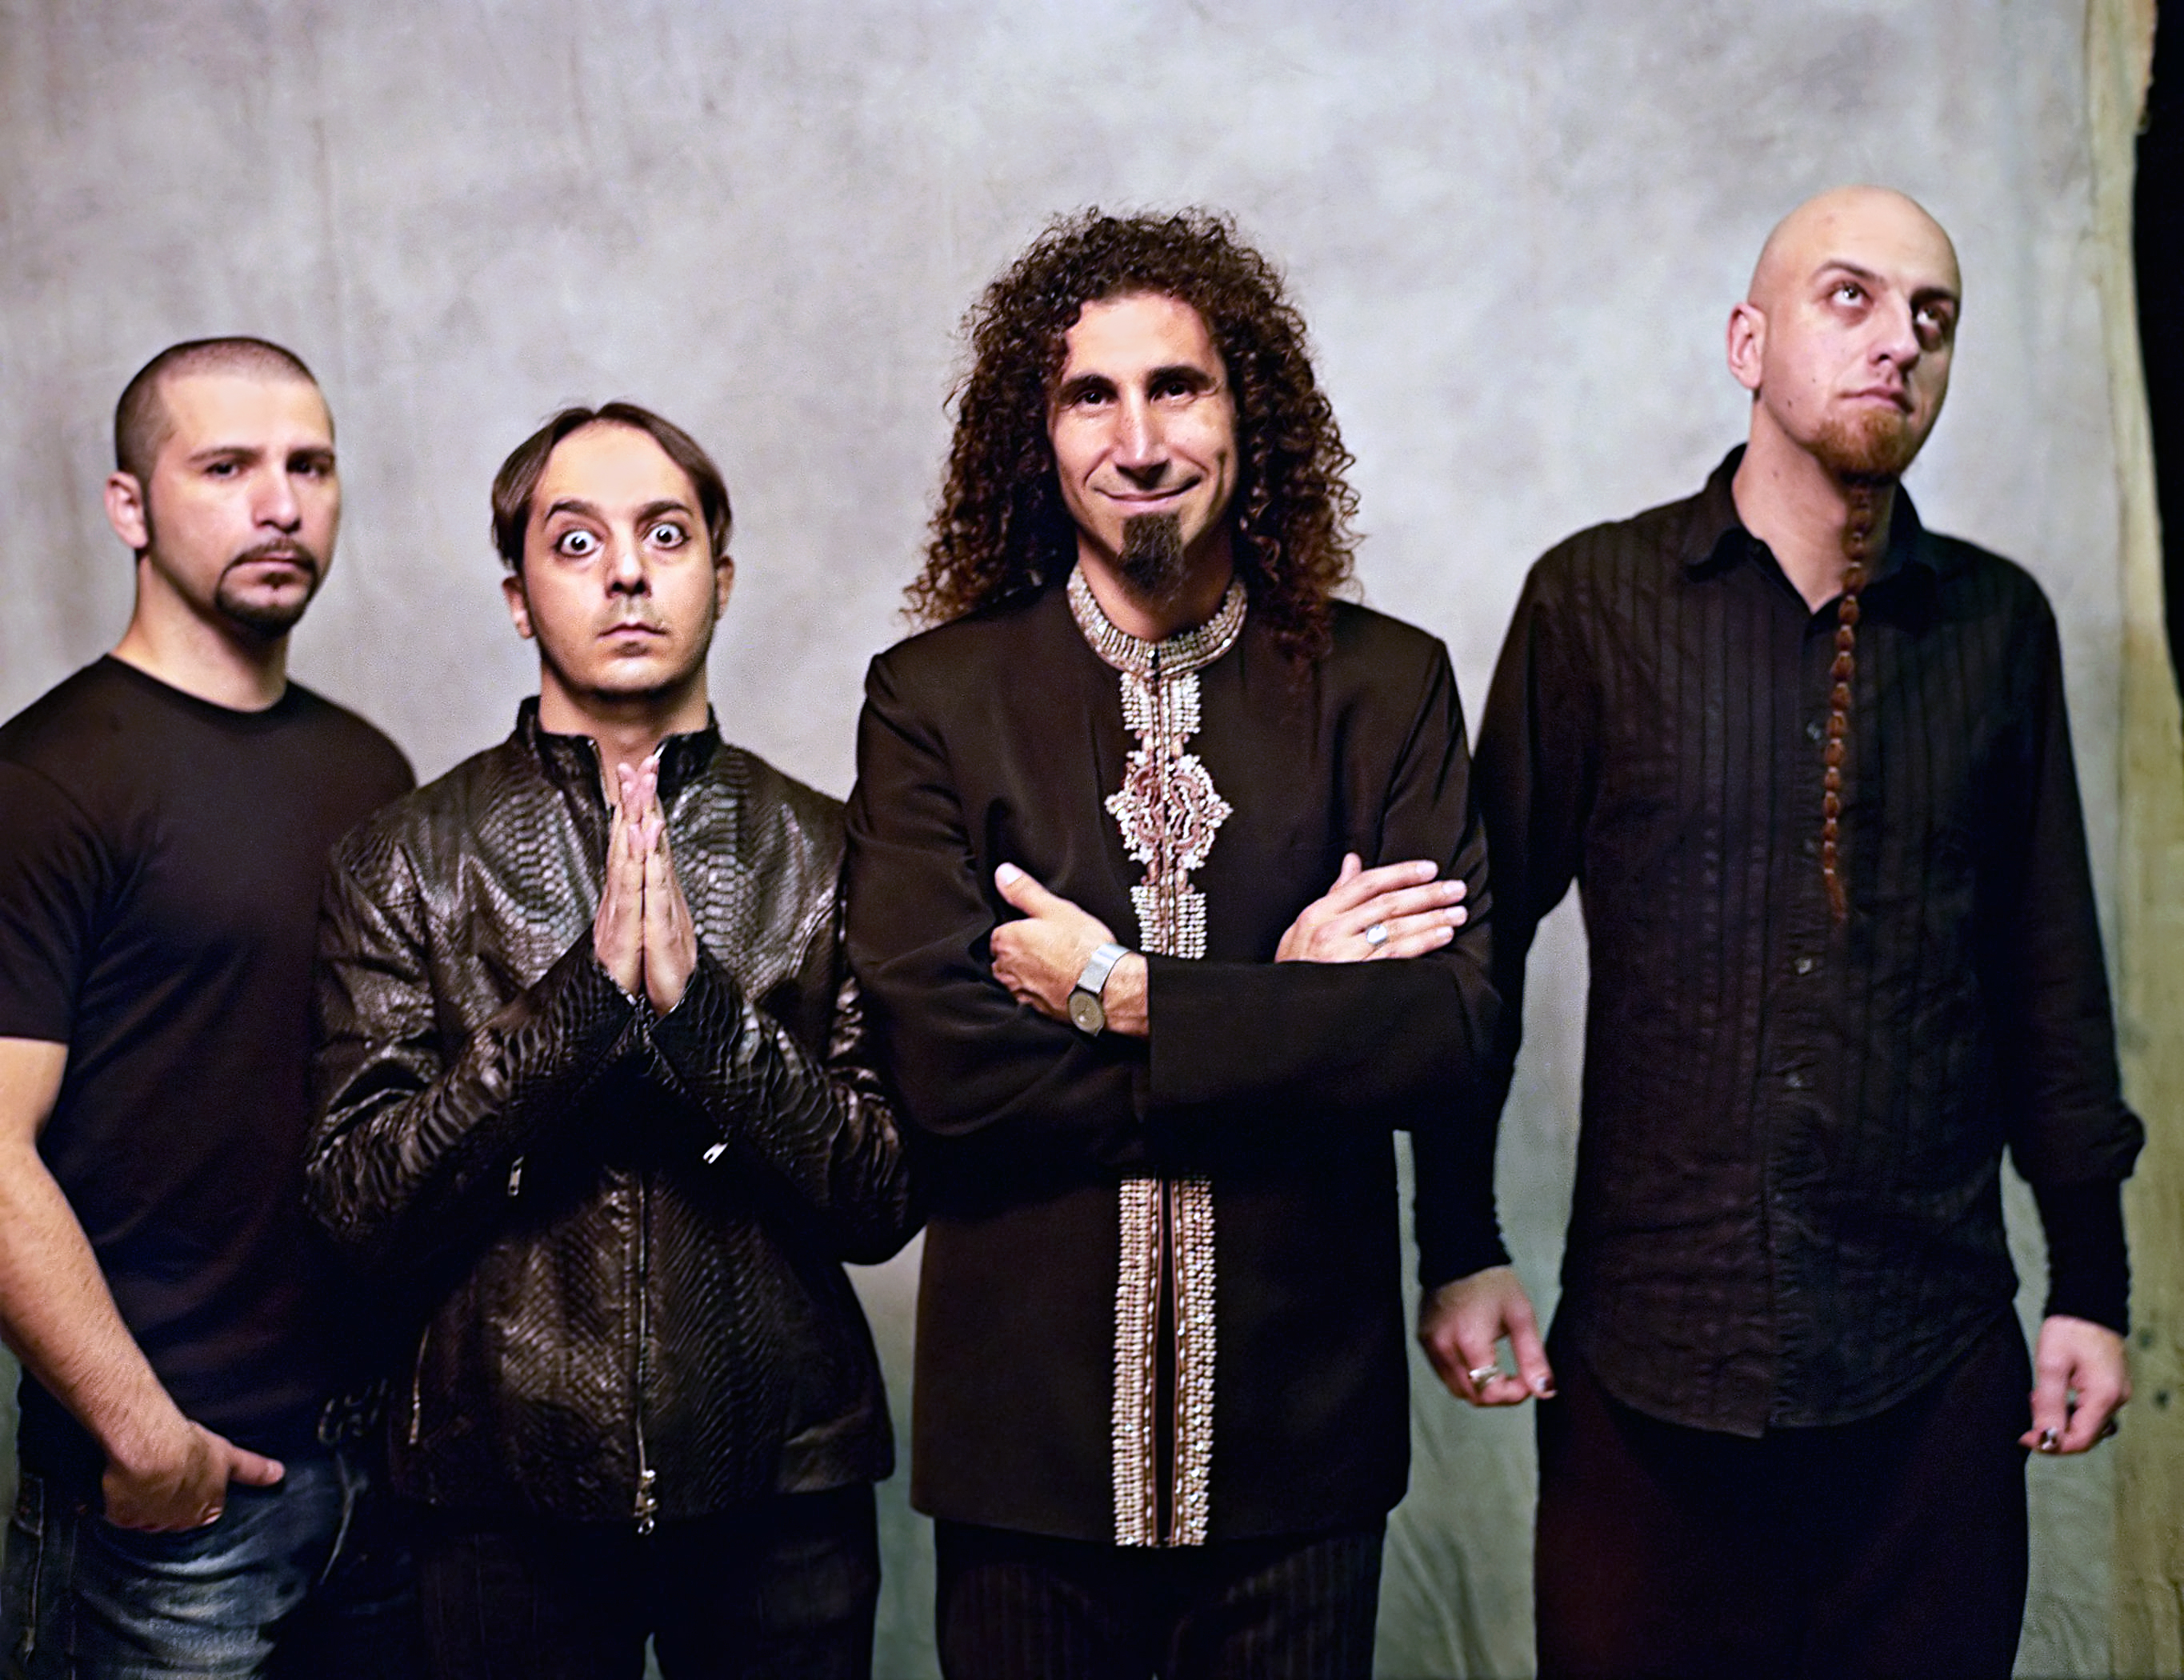 System of a down википедия. SOAD группа. System of a down. System of a down состав группы. System of a down участники.